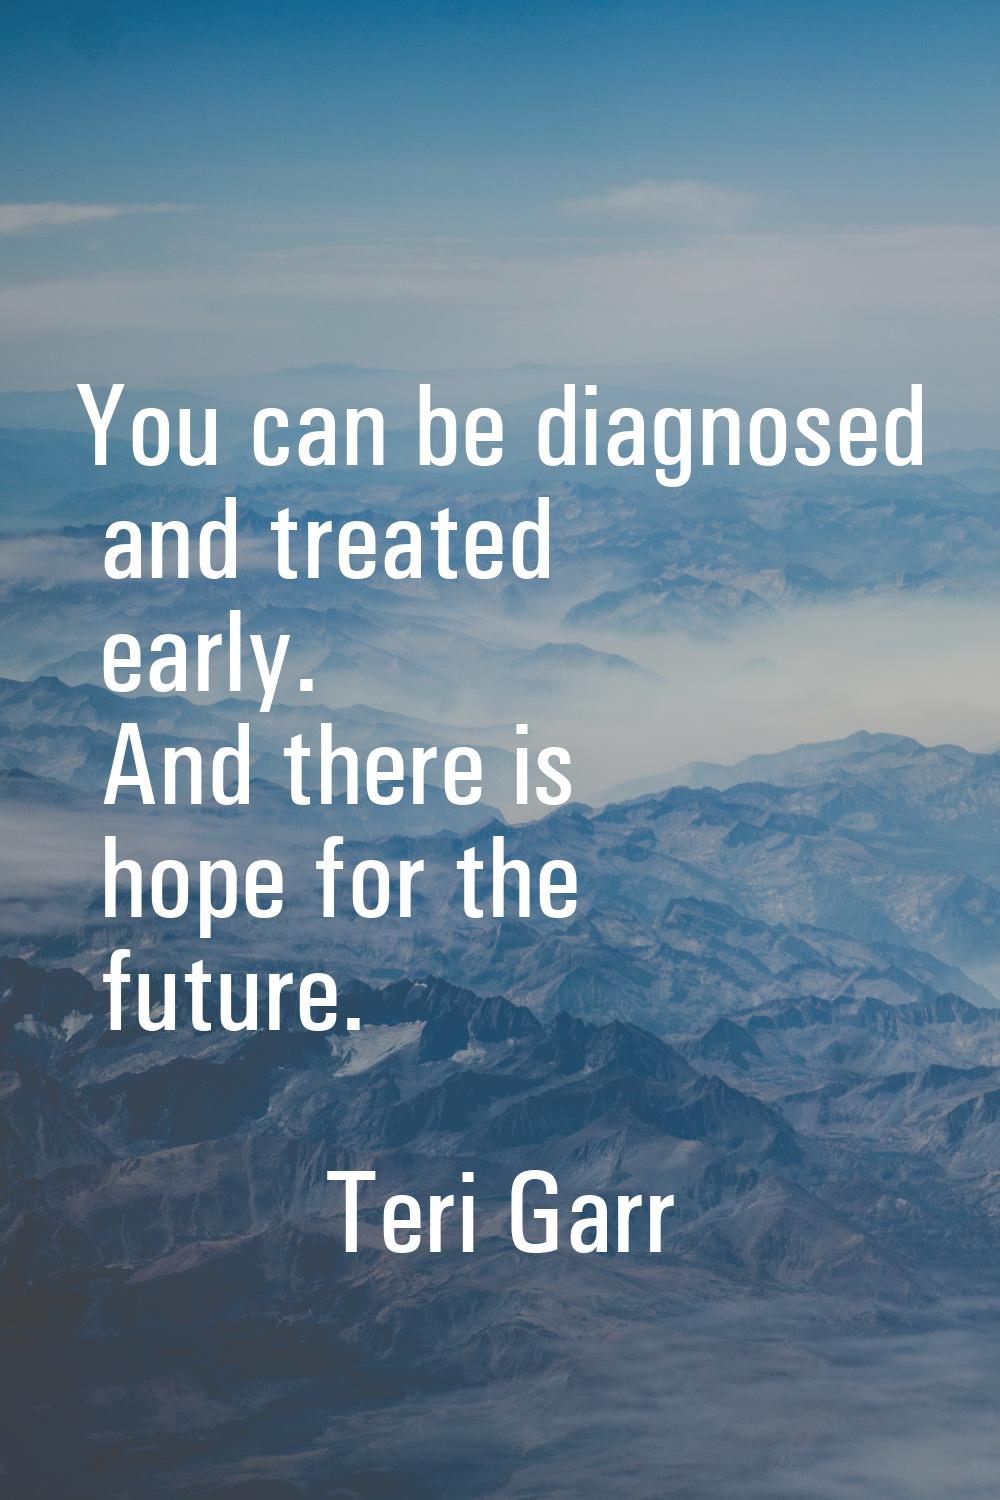 You can be diagnosed and treated early. And there is hope for the future.